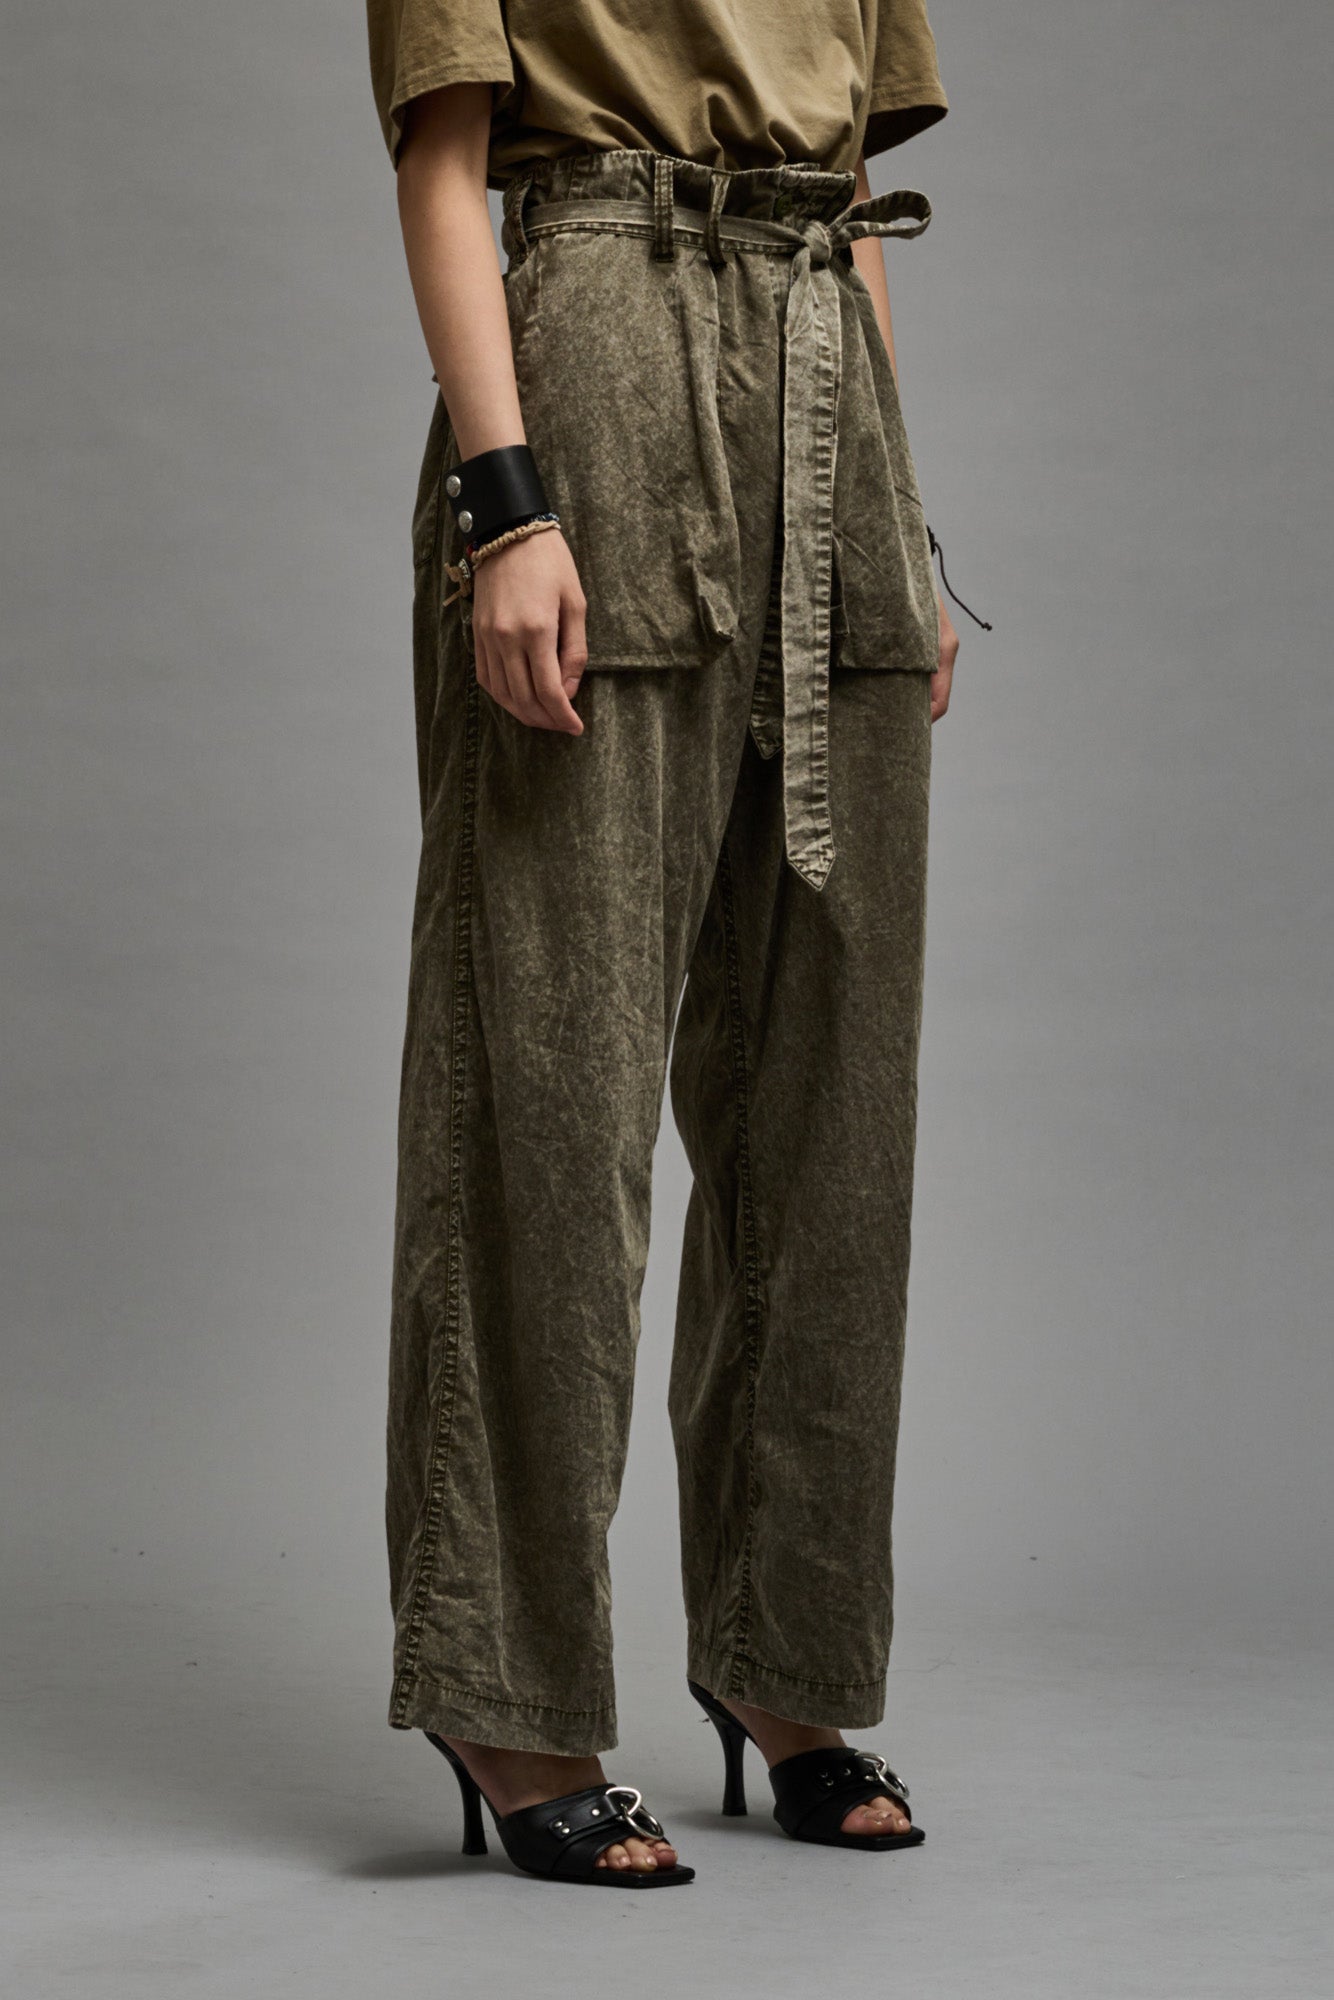 French Connection wide leg linen blend pants in olive